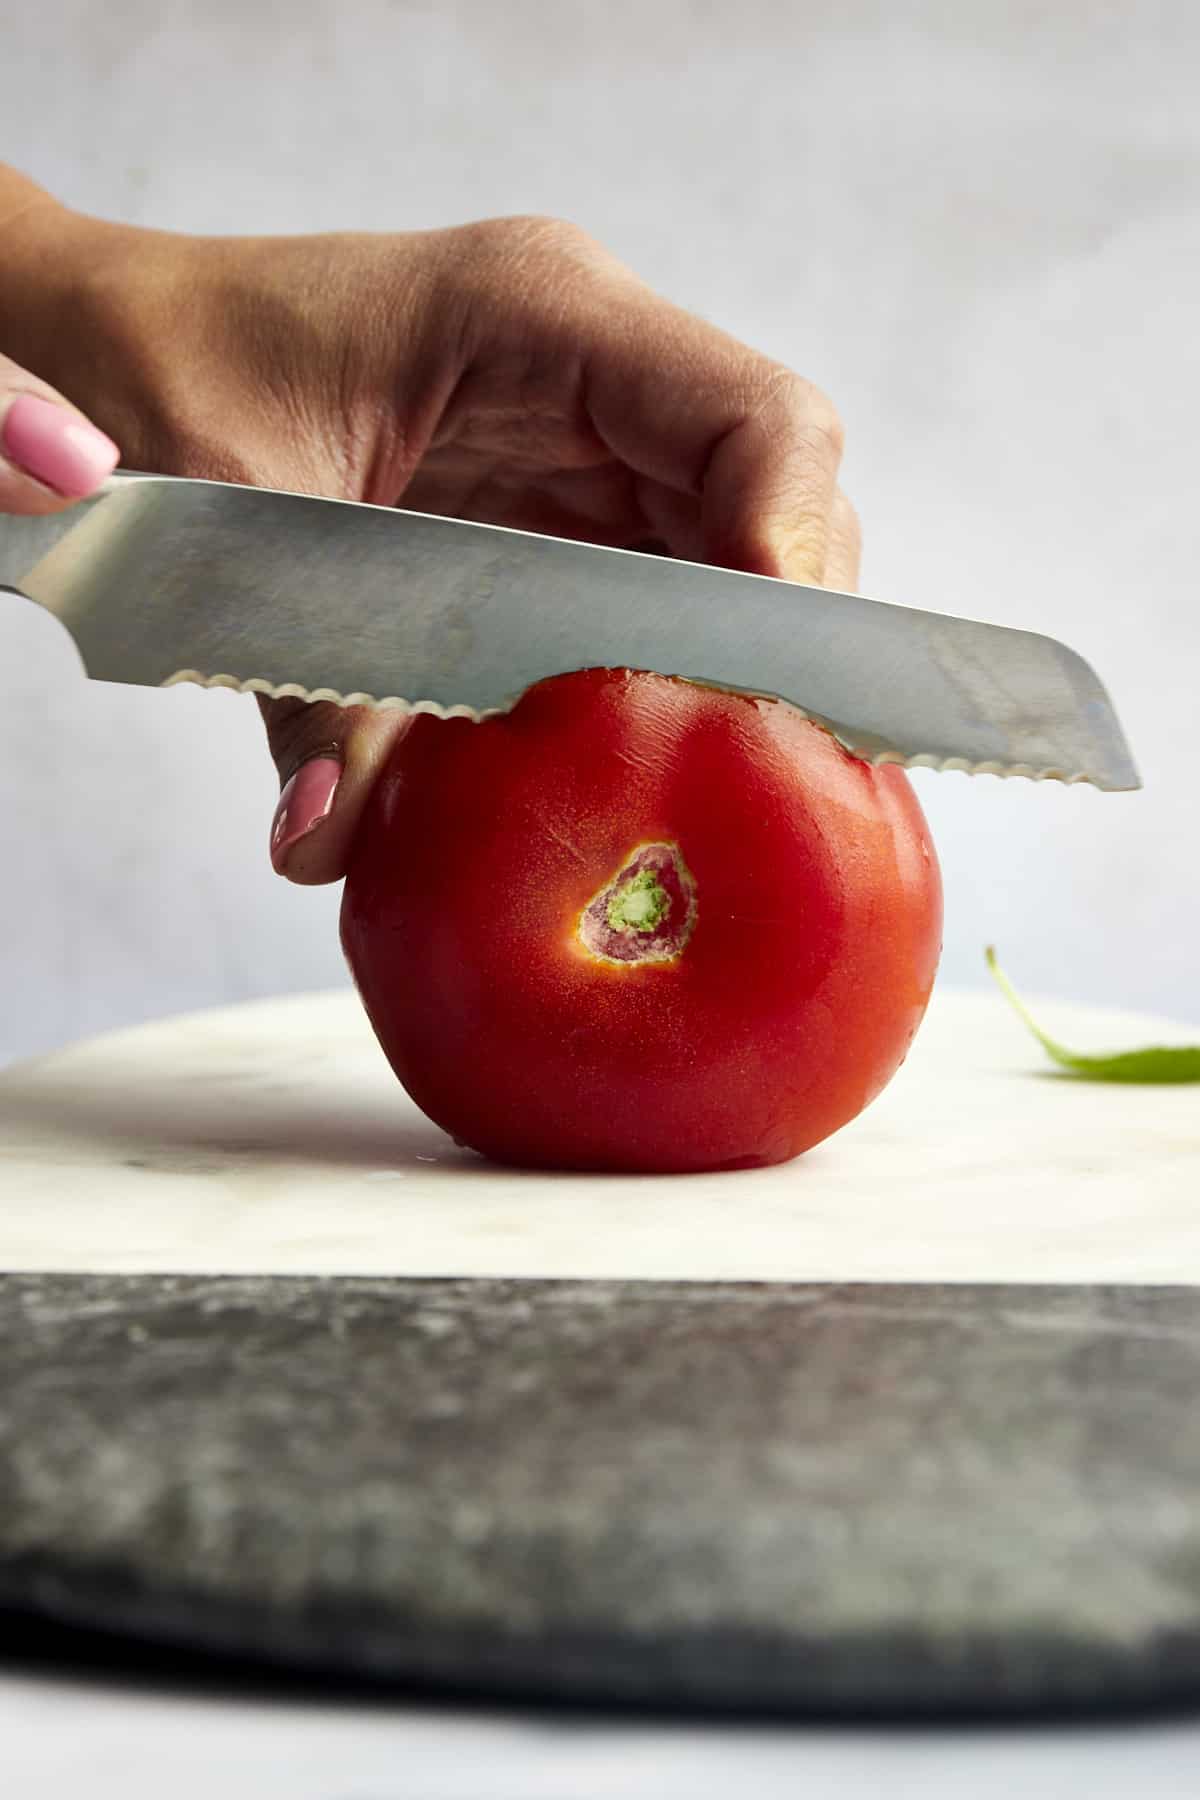 A side view of the top of a tomato being sliced off.